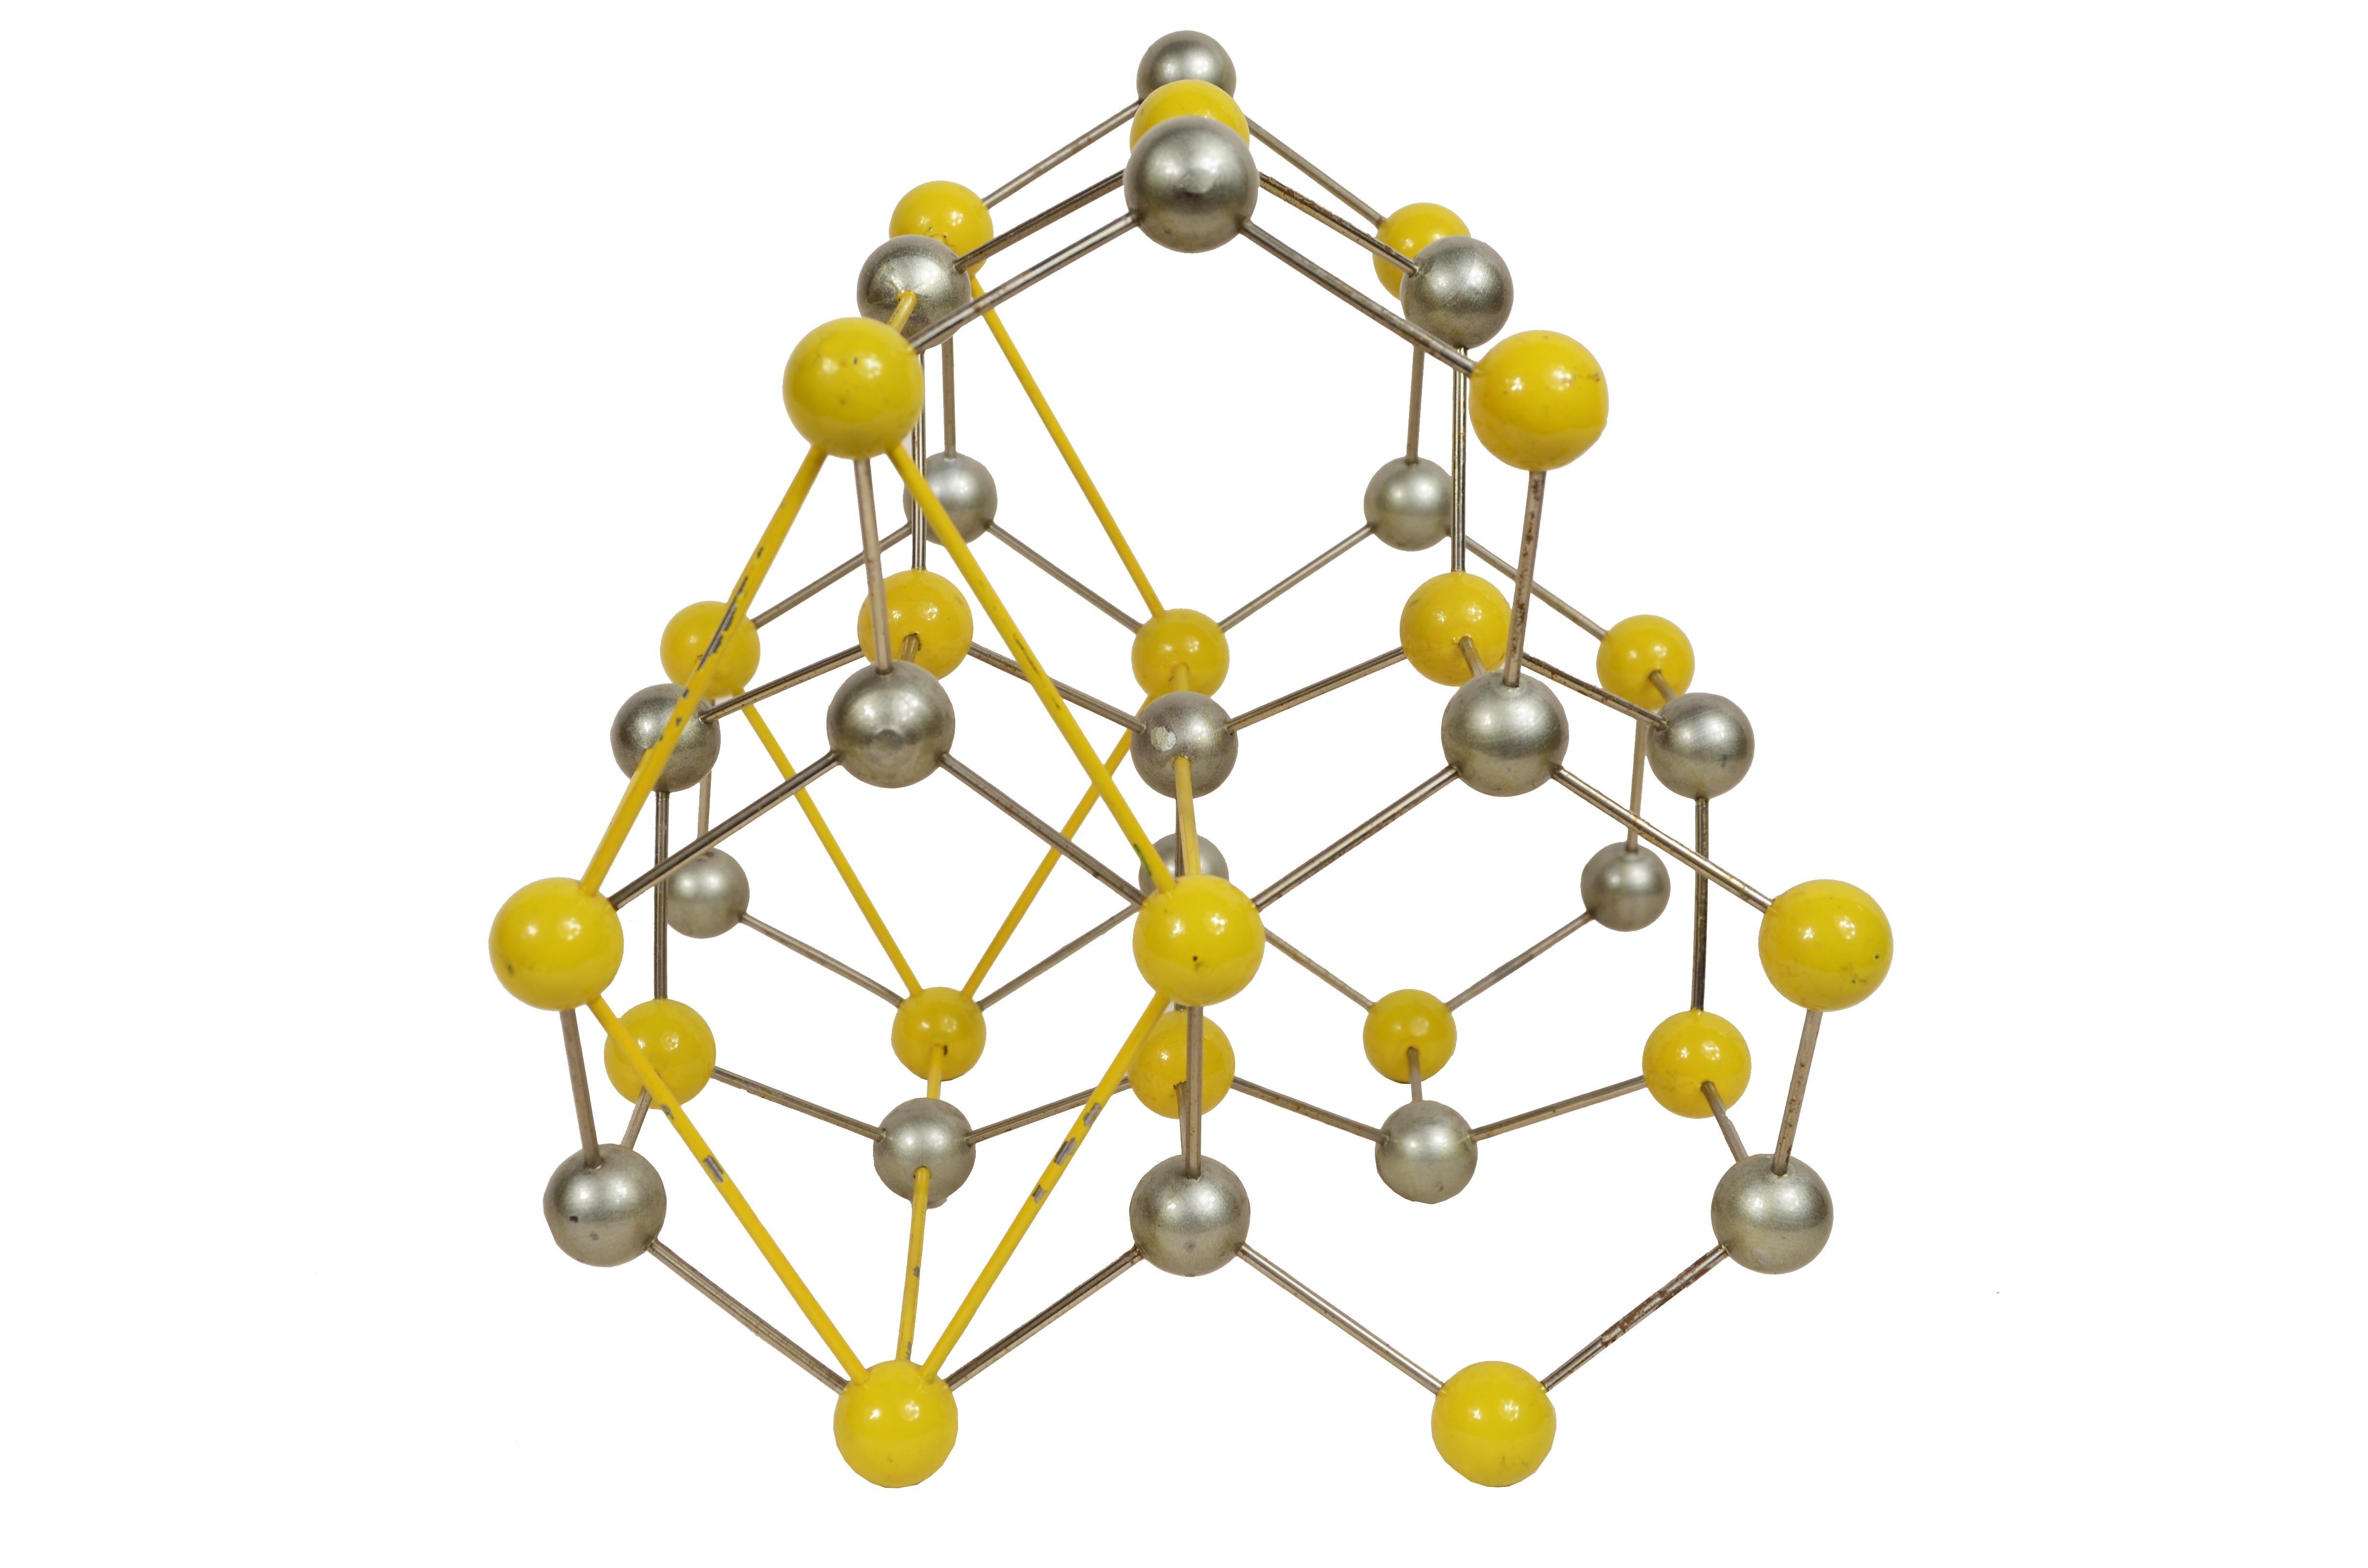 Atomic structure for educational use of zinc-iron sulfide, made of metal with Bakelite spheres painted gray and yellow. 
It is an inorganic compound found naturally in wurtzite, a mineral named after the French chemist Charles Wurtz.
It occurs as